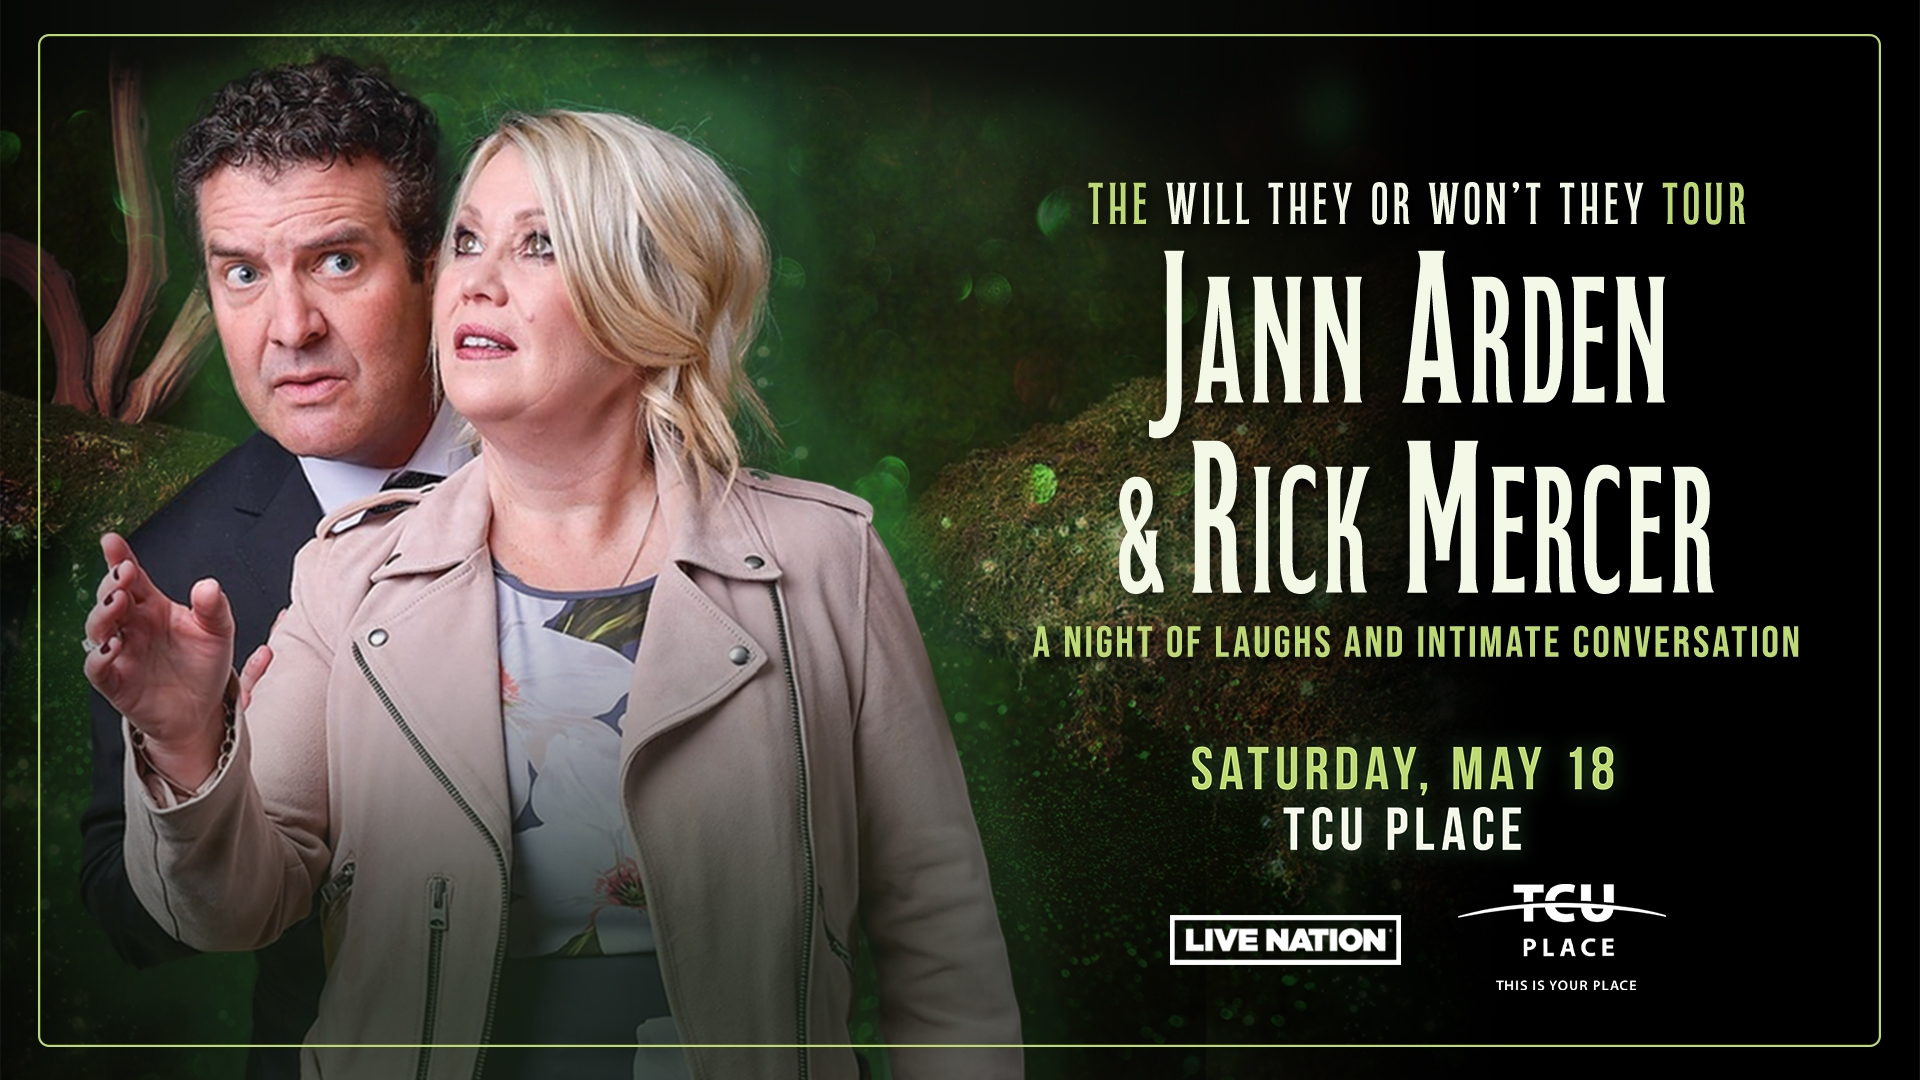 Jann Arden & Rick Mercer: The Will They Won't They Tour - May 18th at TCU Place